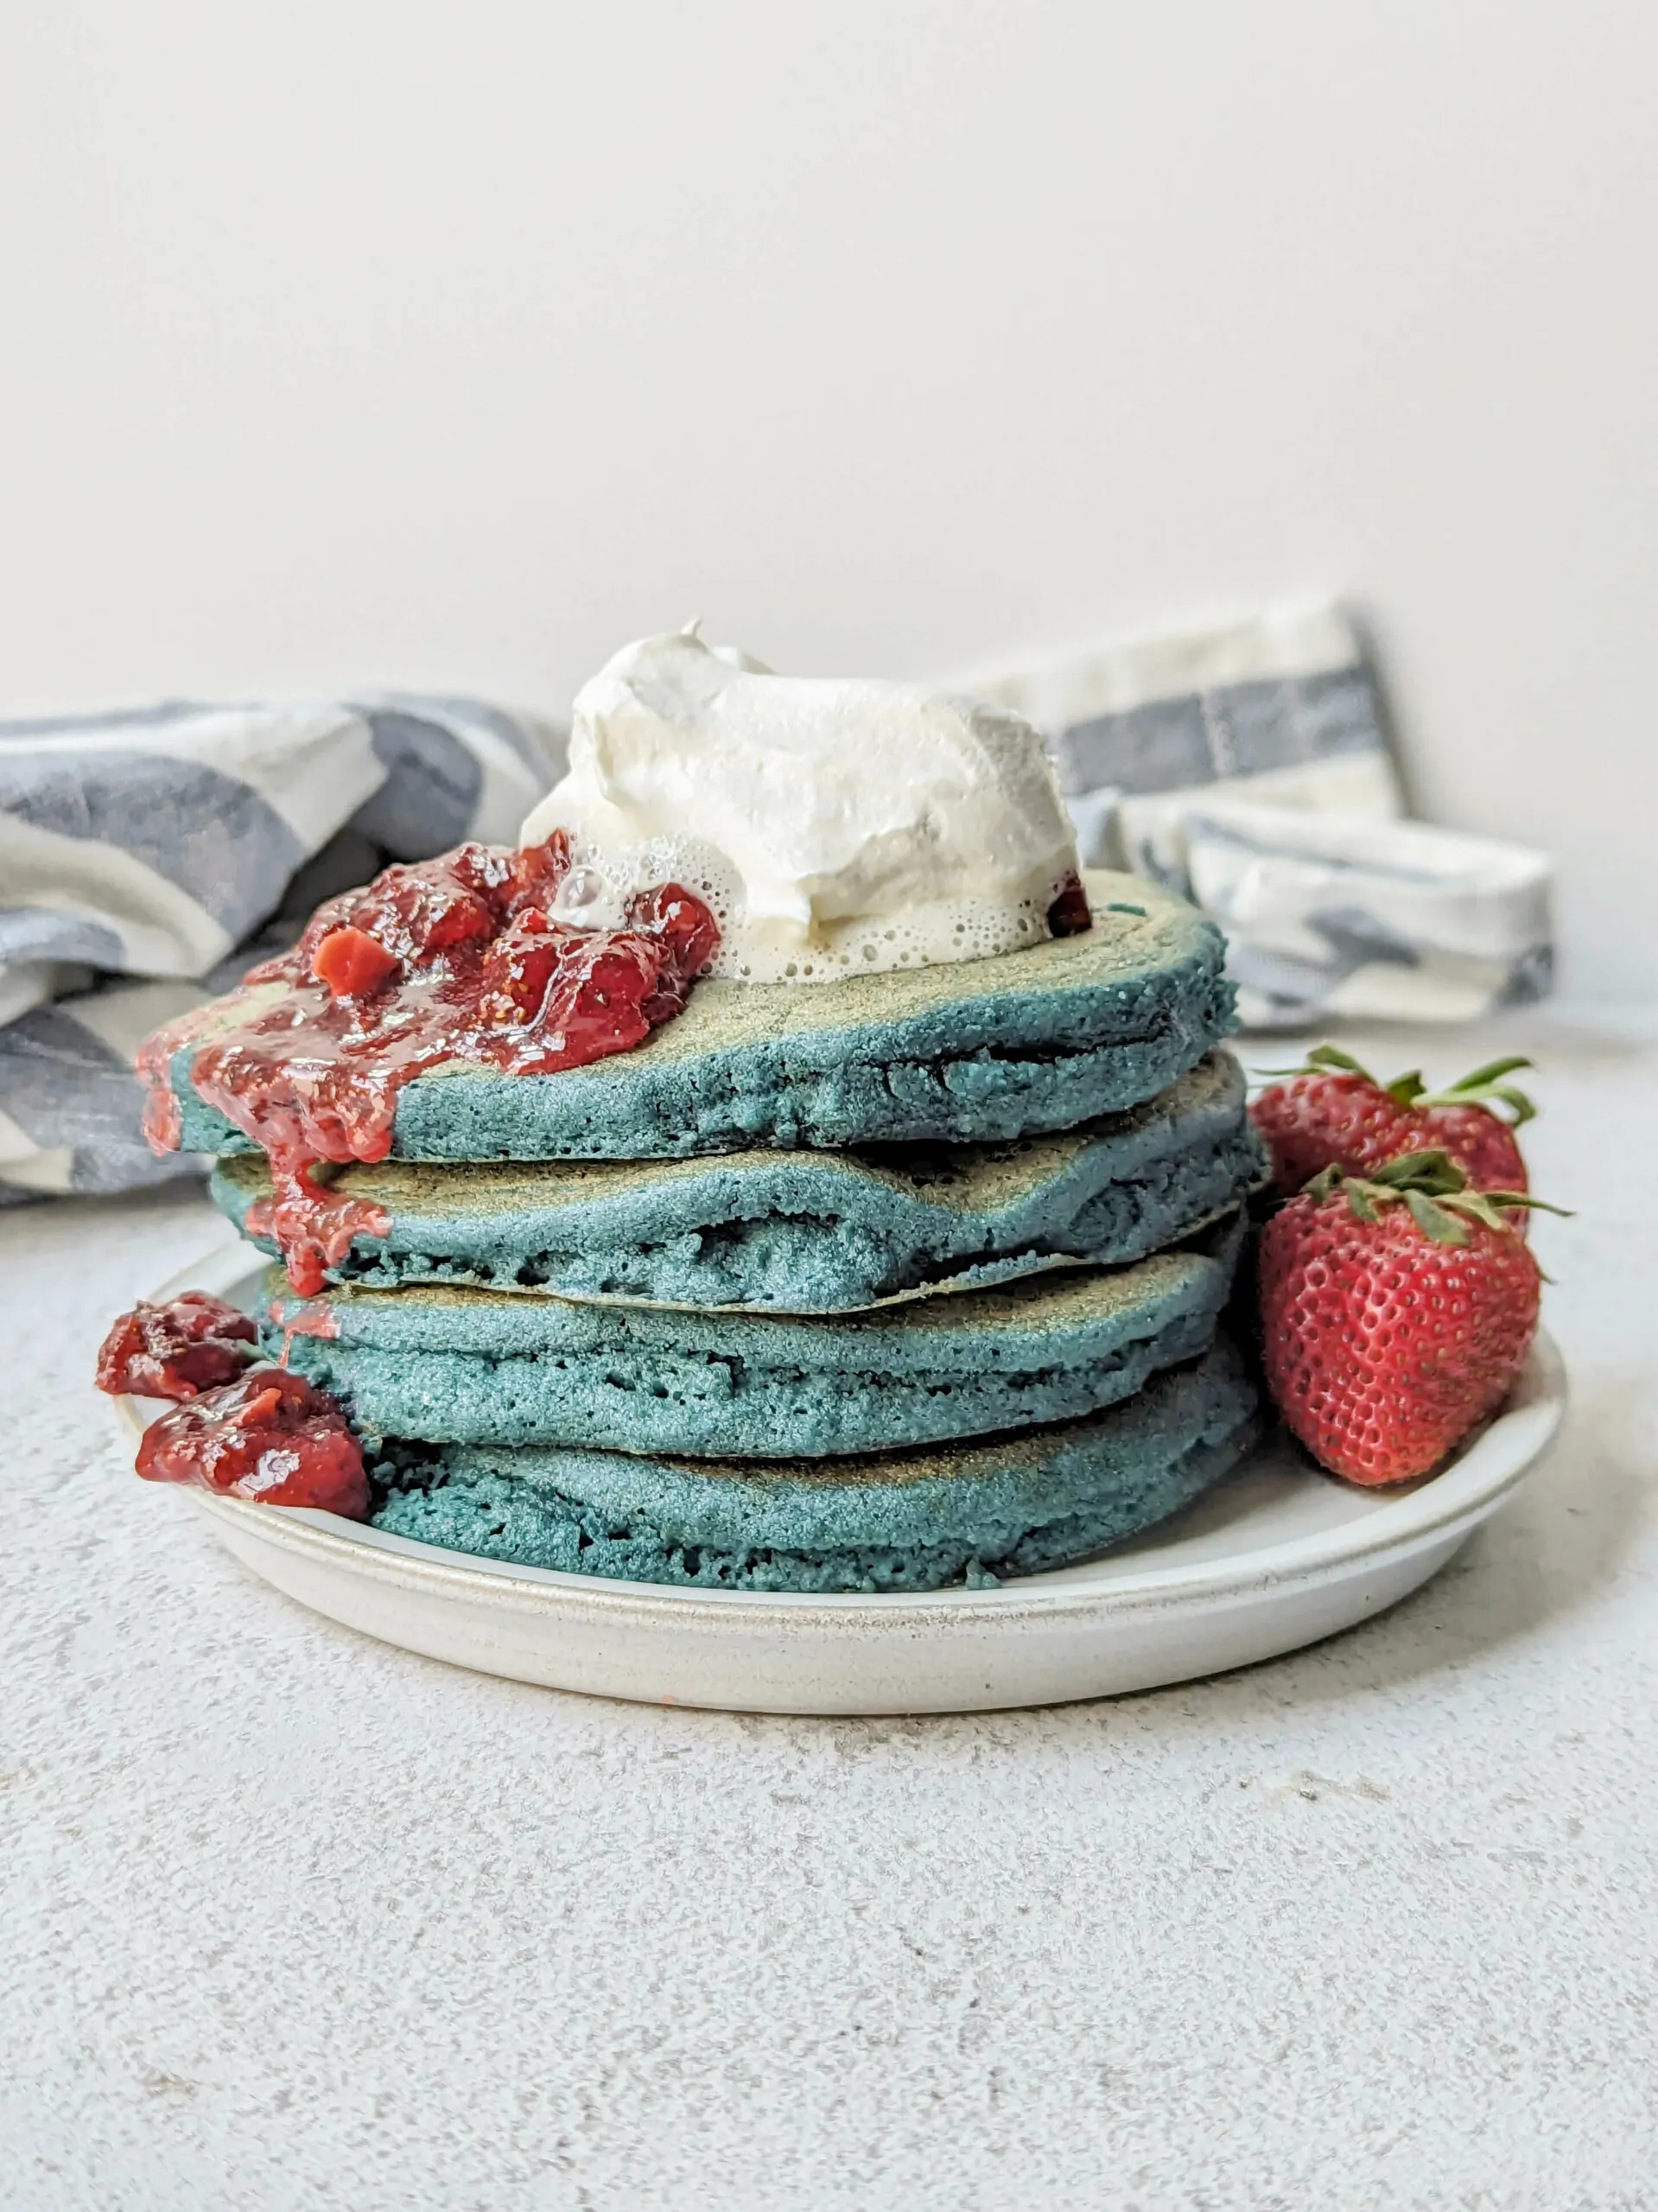 Blue pancakes topped with strawberry compote and whipped cream.